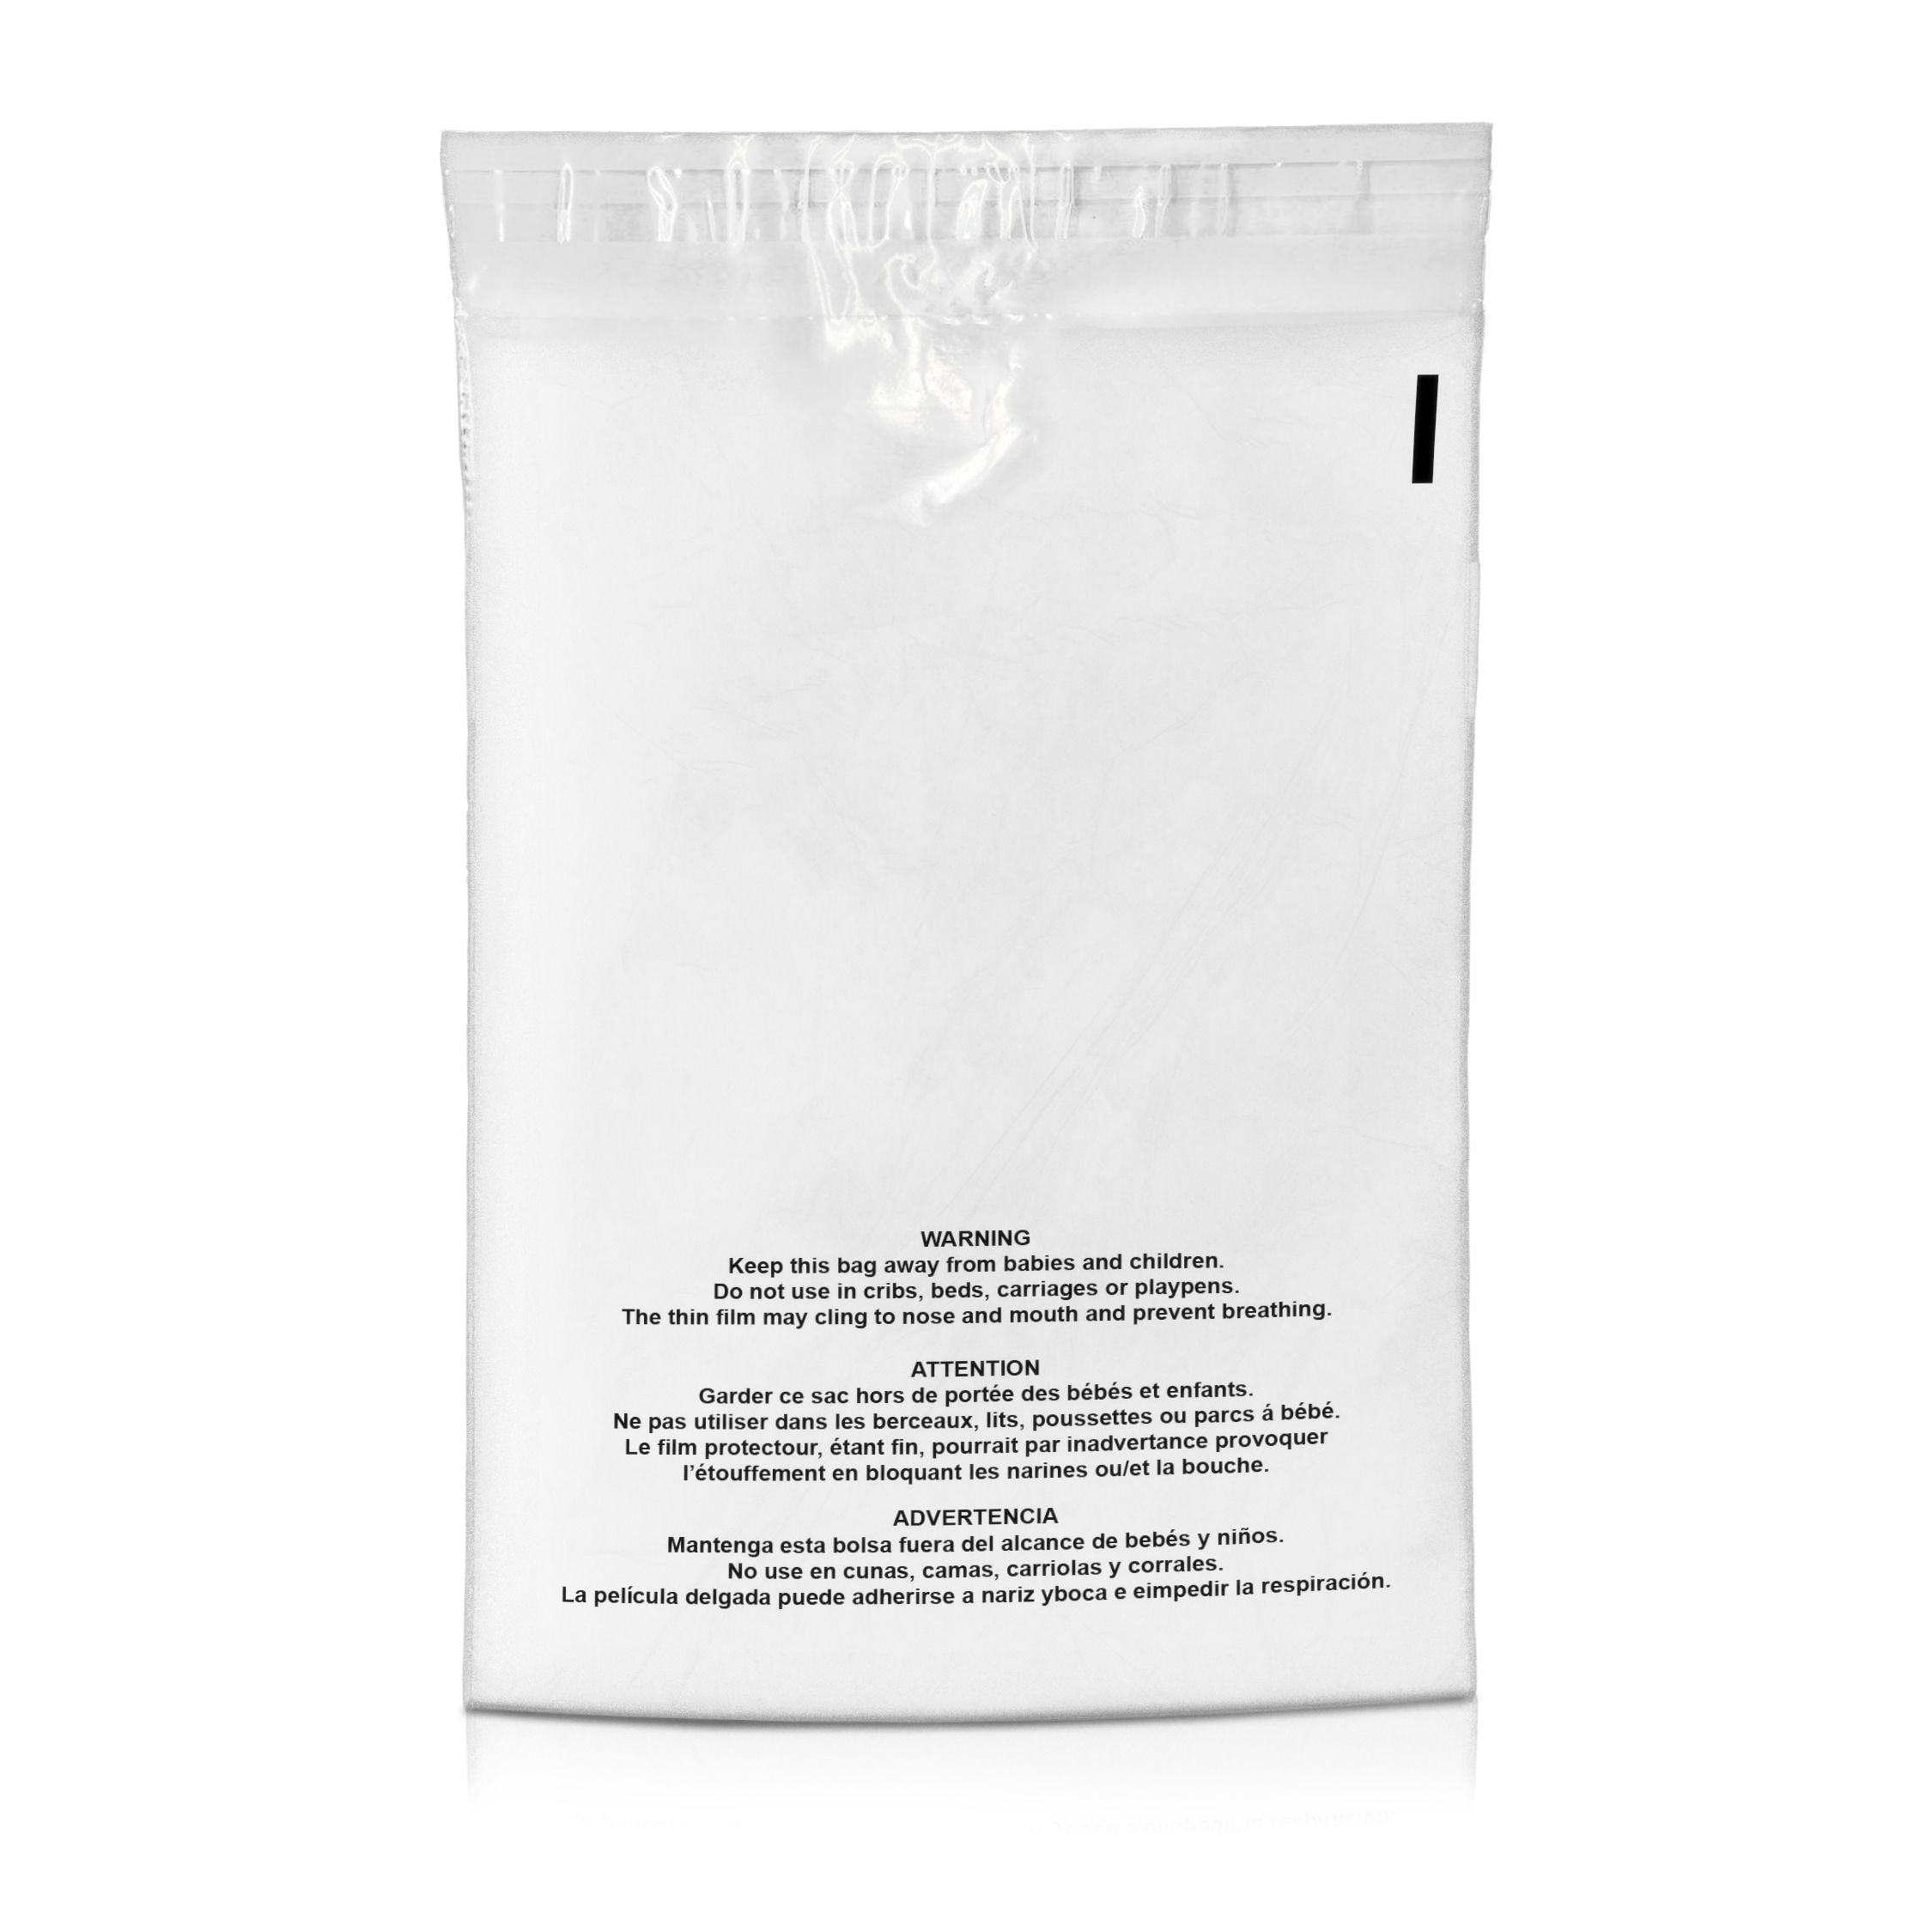 100 SUFFOCATION WARNING 10 x 12 RESEALABLE CELLO POLY BAGS 1.5 MIL OPP BAGS 